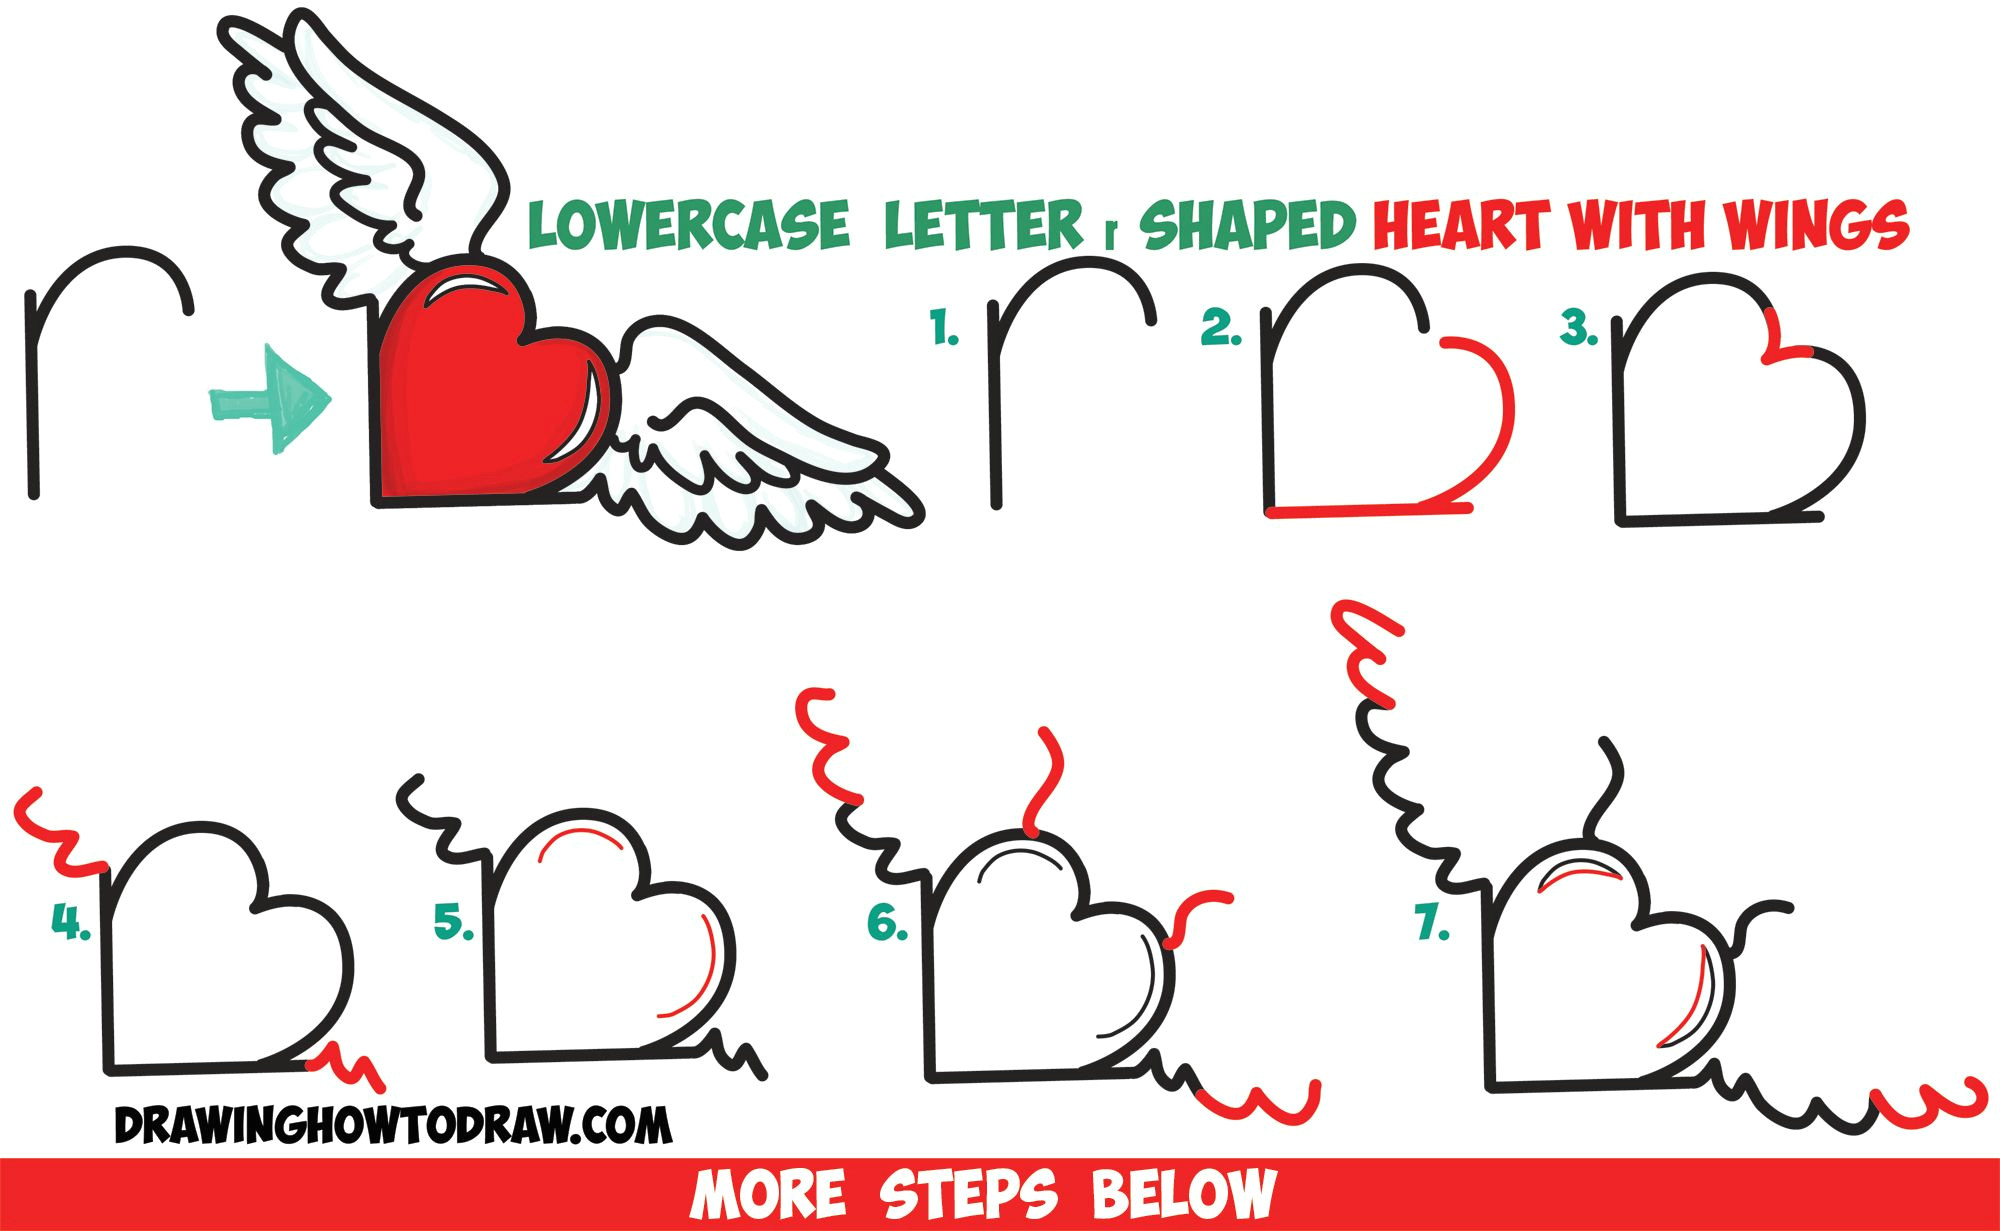 how to draw heart with wings from lowercase letter r shapes easy step by step